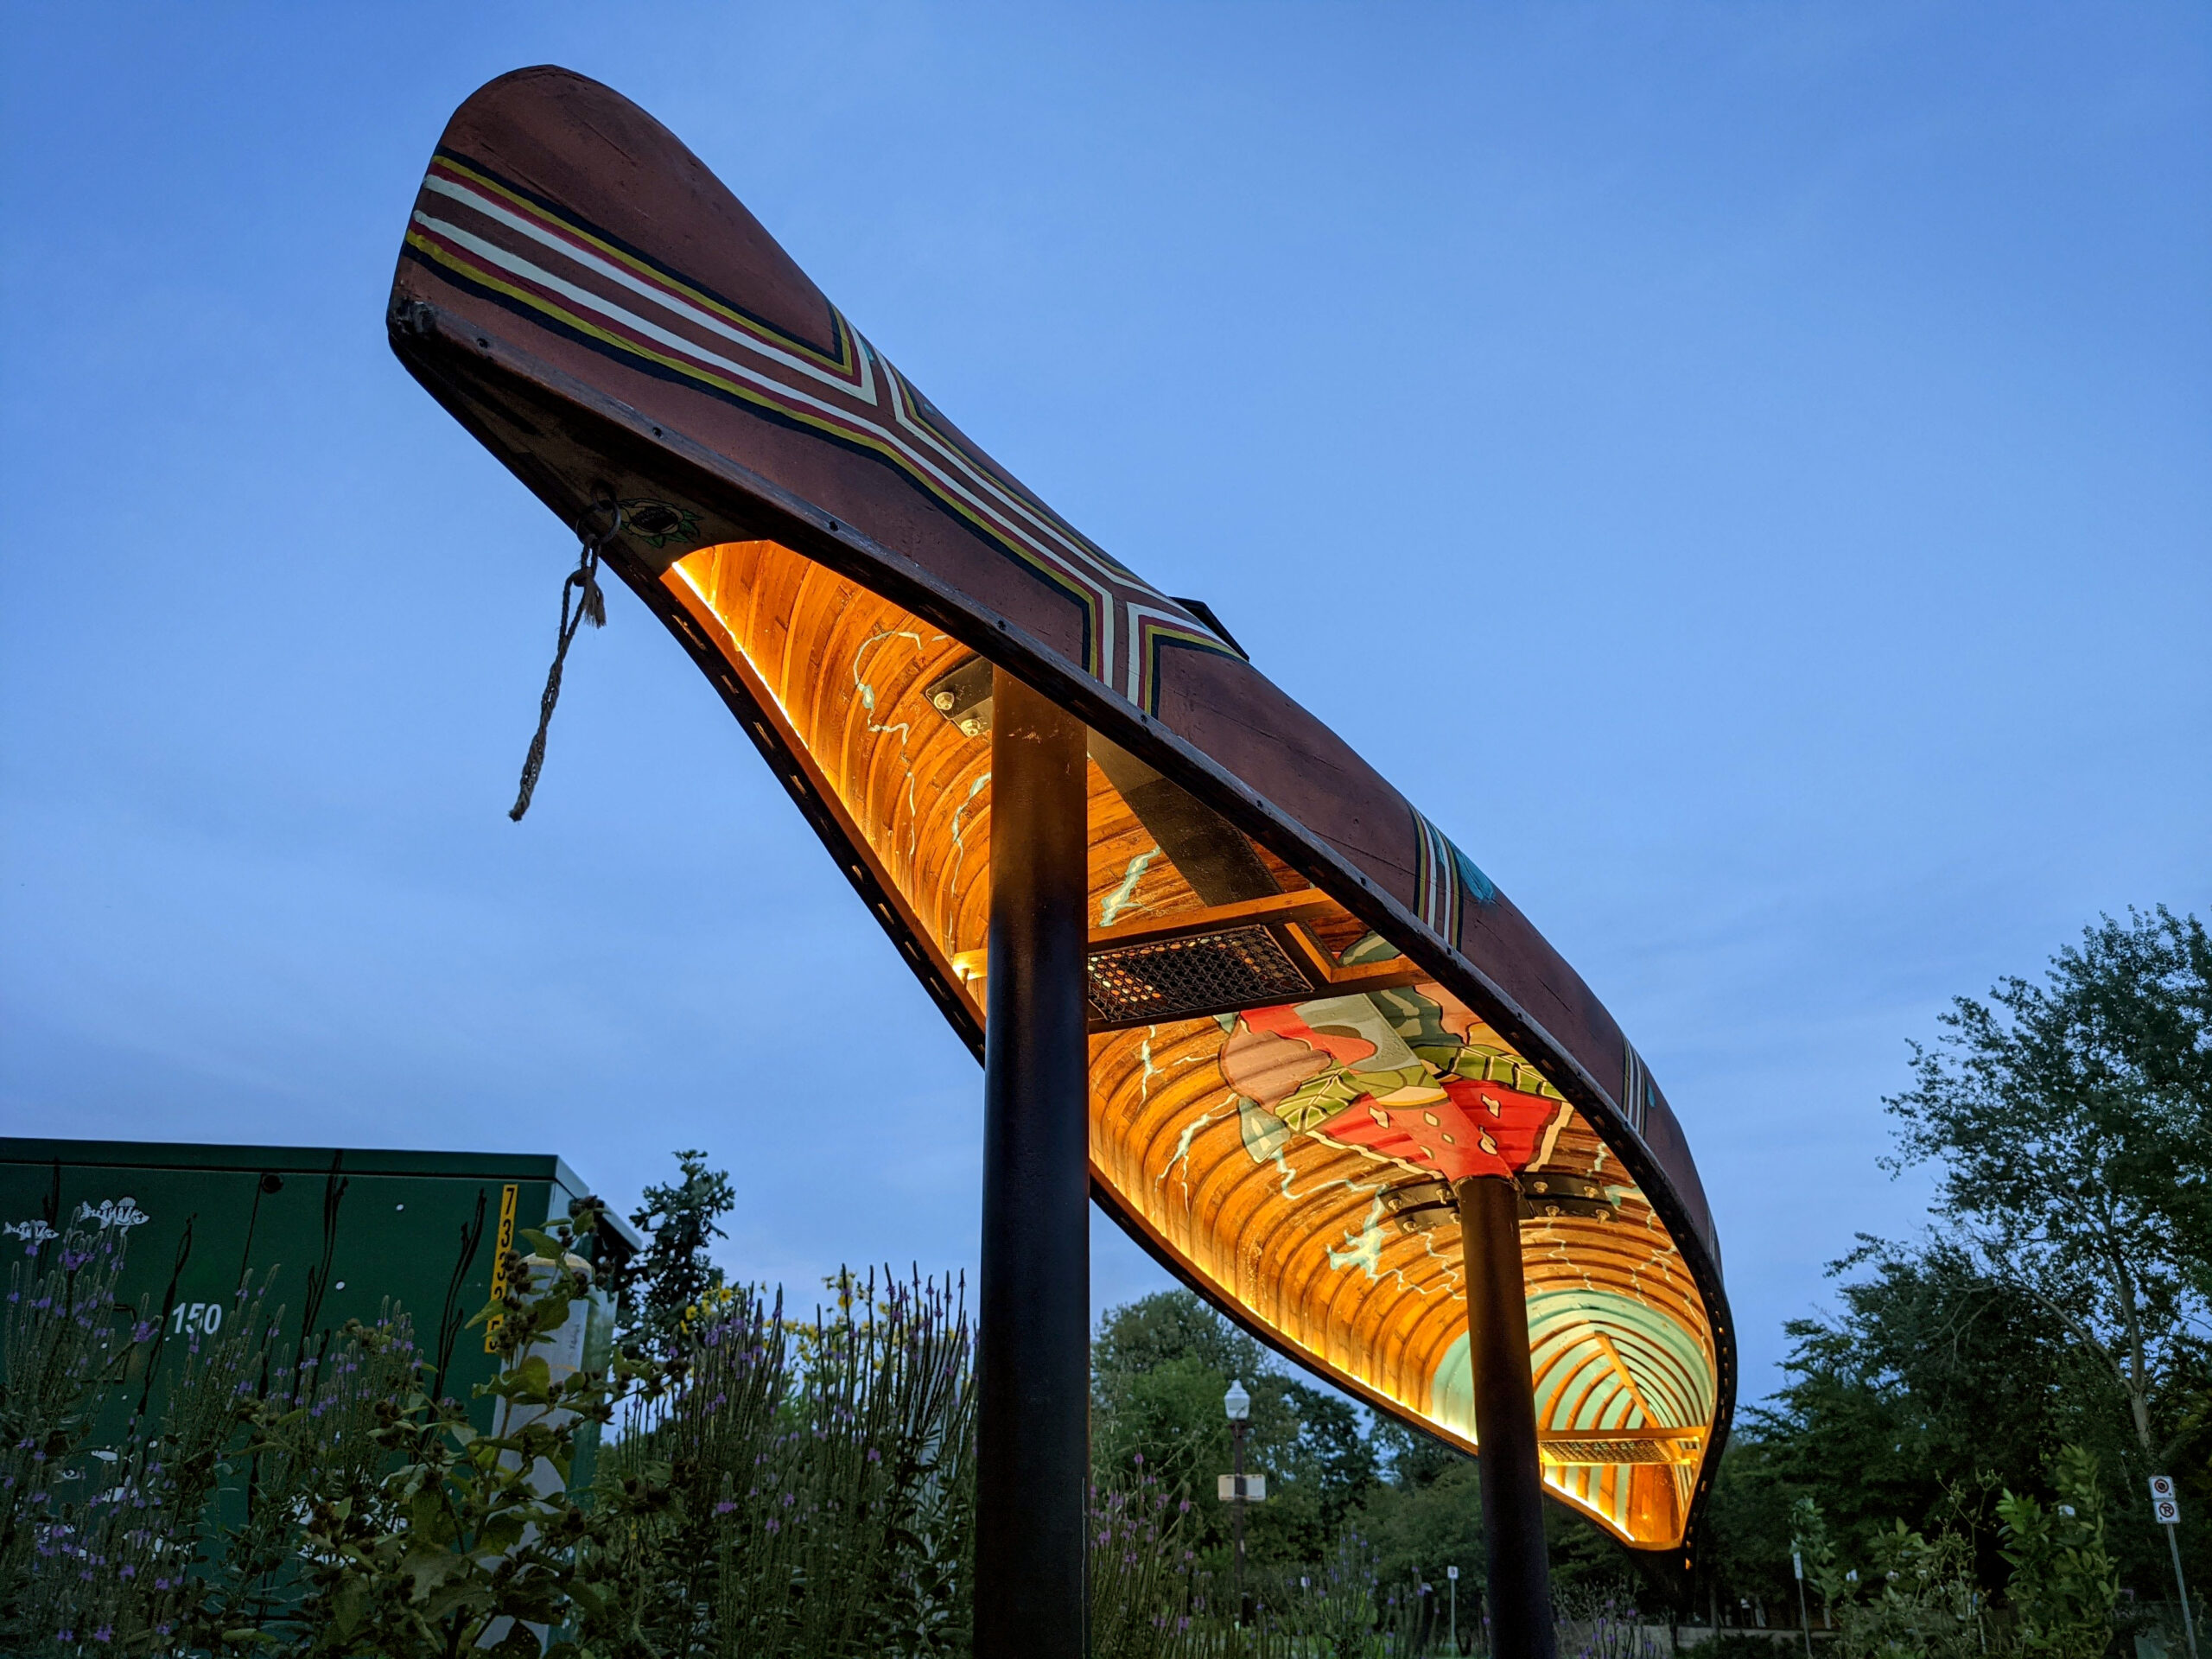 Public art display of a hand painted canoe illuminated from underneath